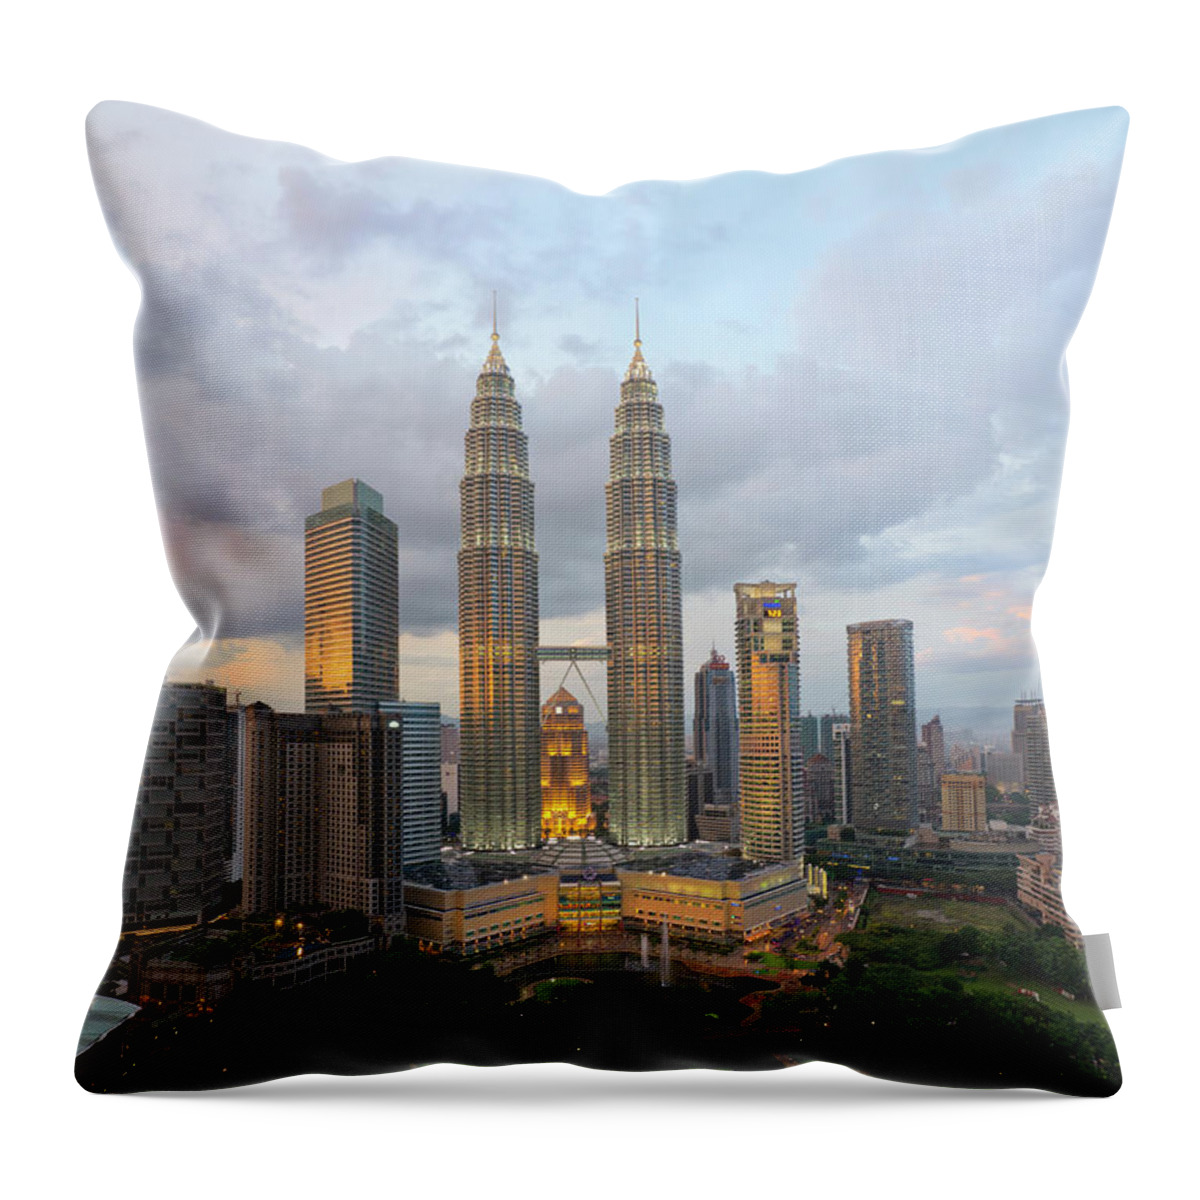 Outdoors Throw Pillow featuring the photograph Petronas Twin Towers, Kuala Lumpur by Travelpix Ltd